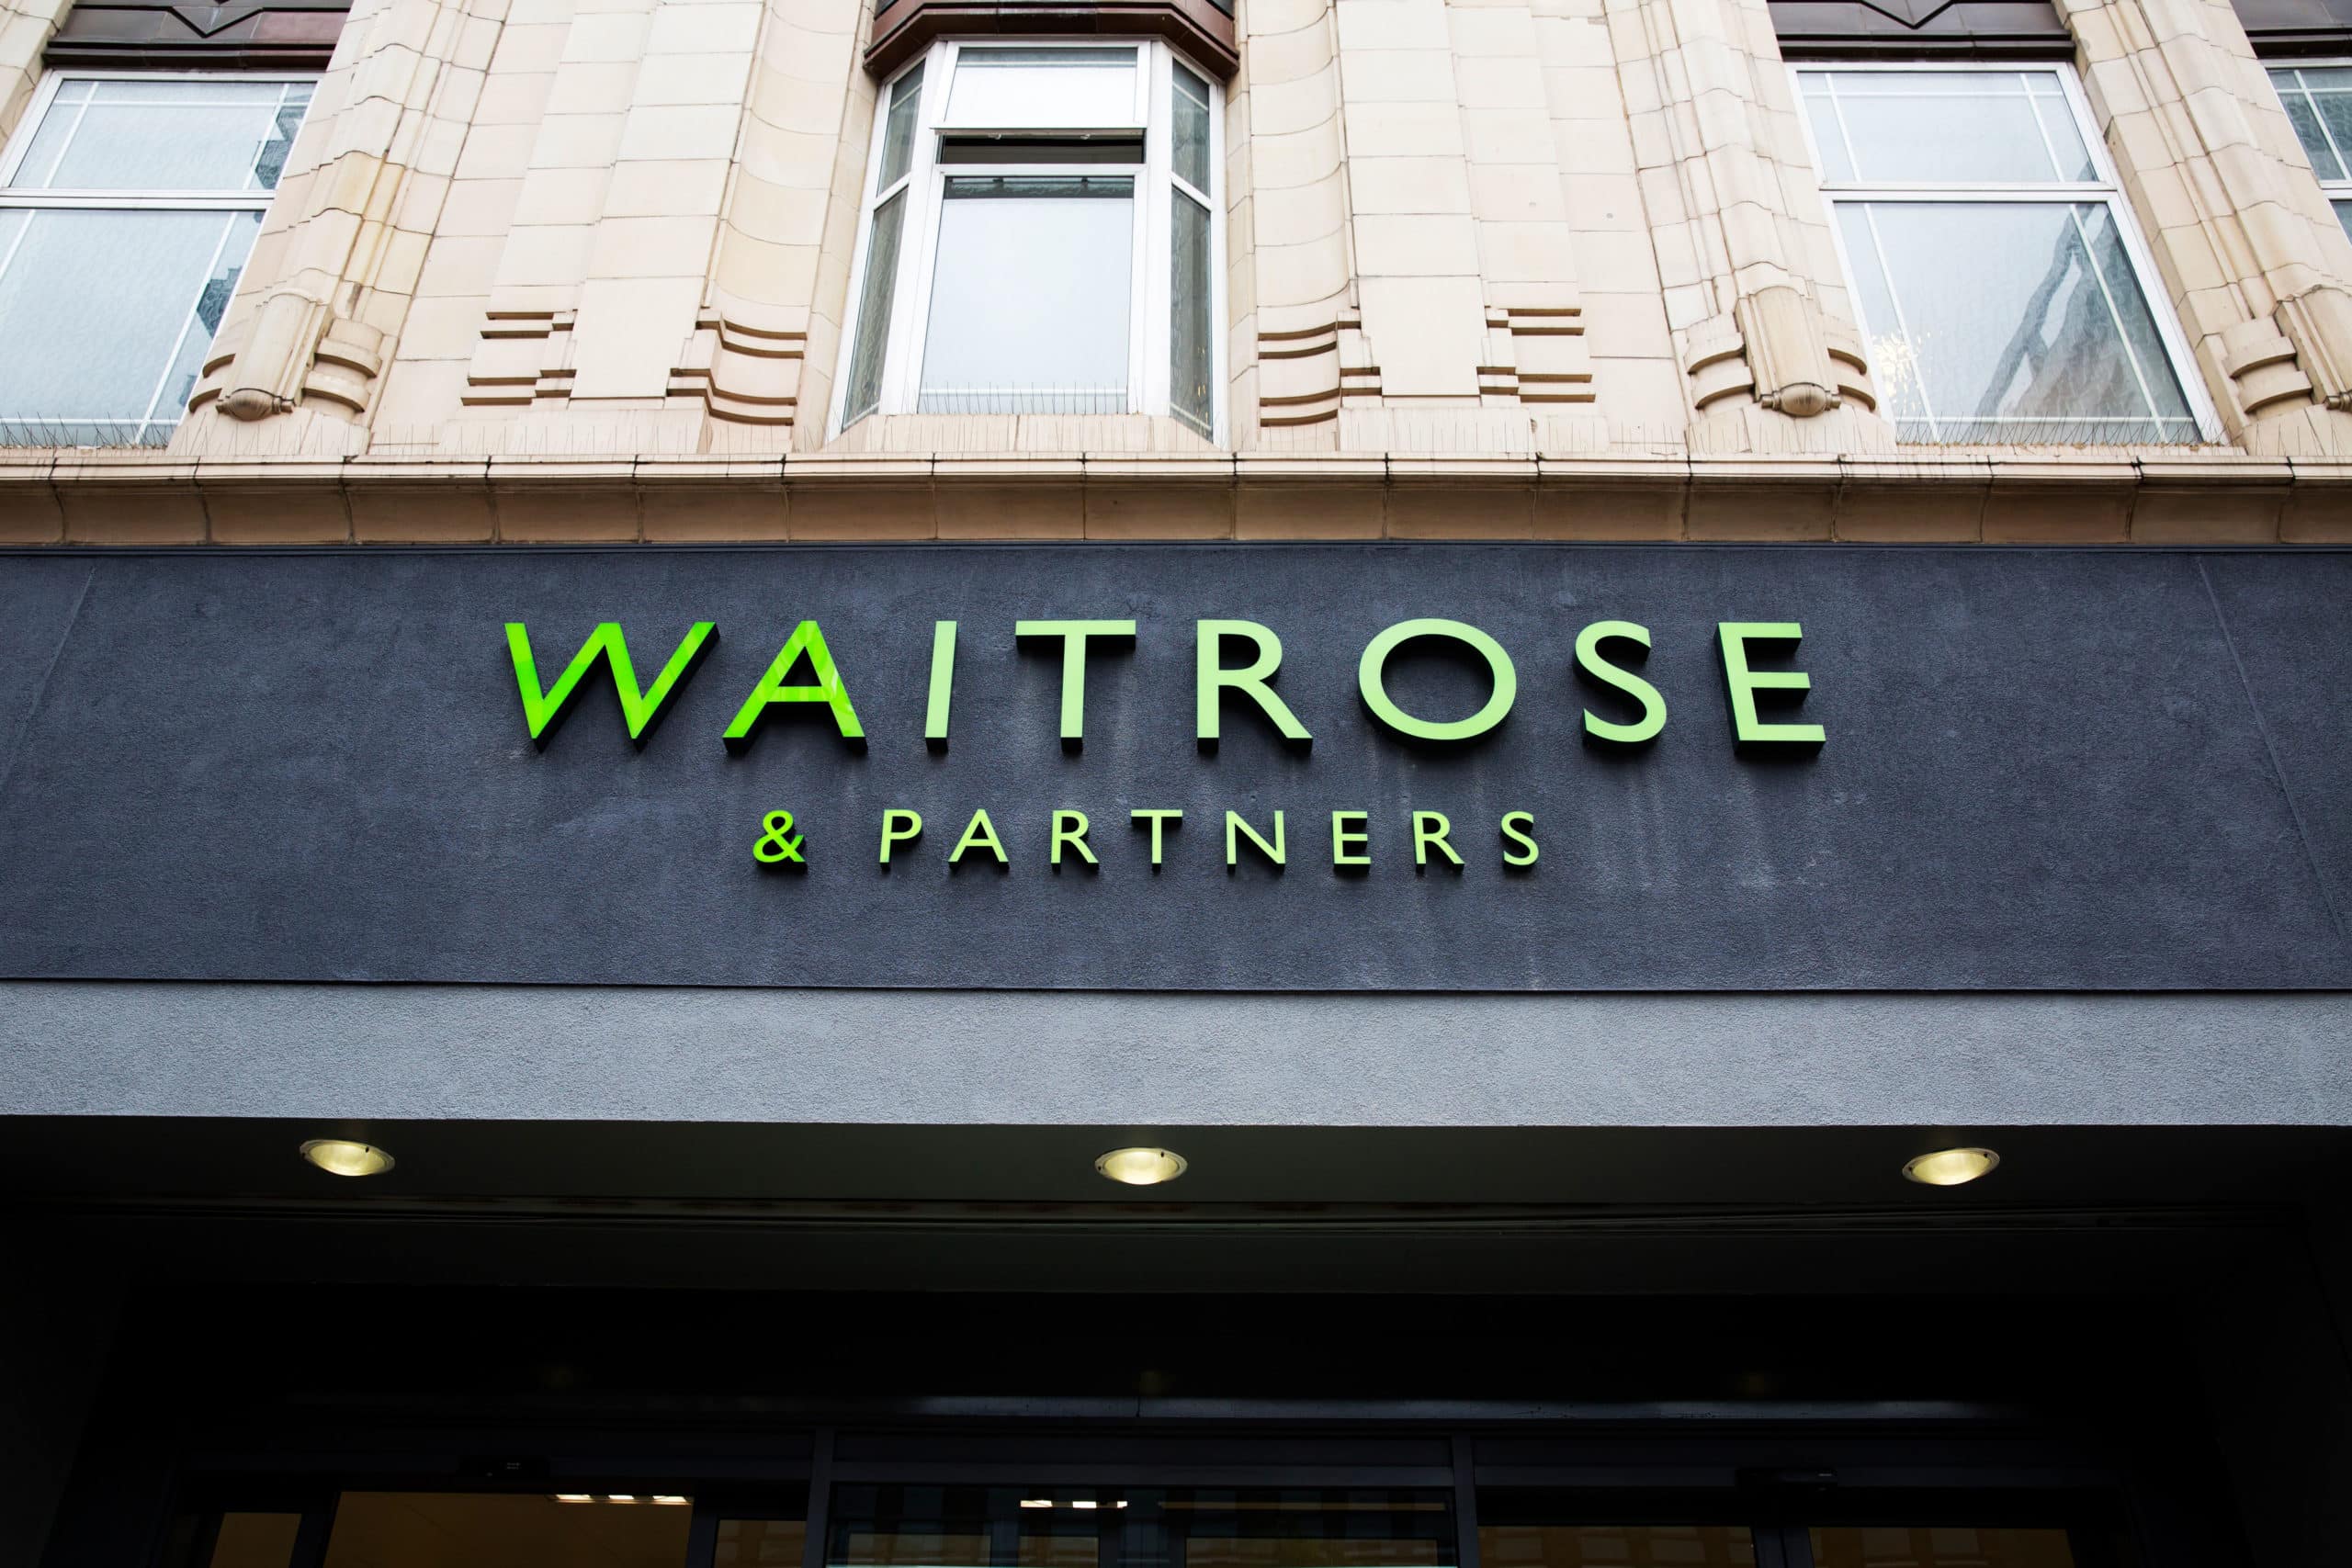 Waitrose is understood to be in talks with Amazon for a third-party deal to sell groceries